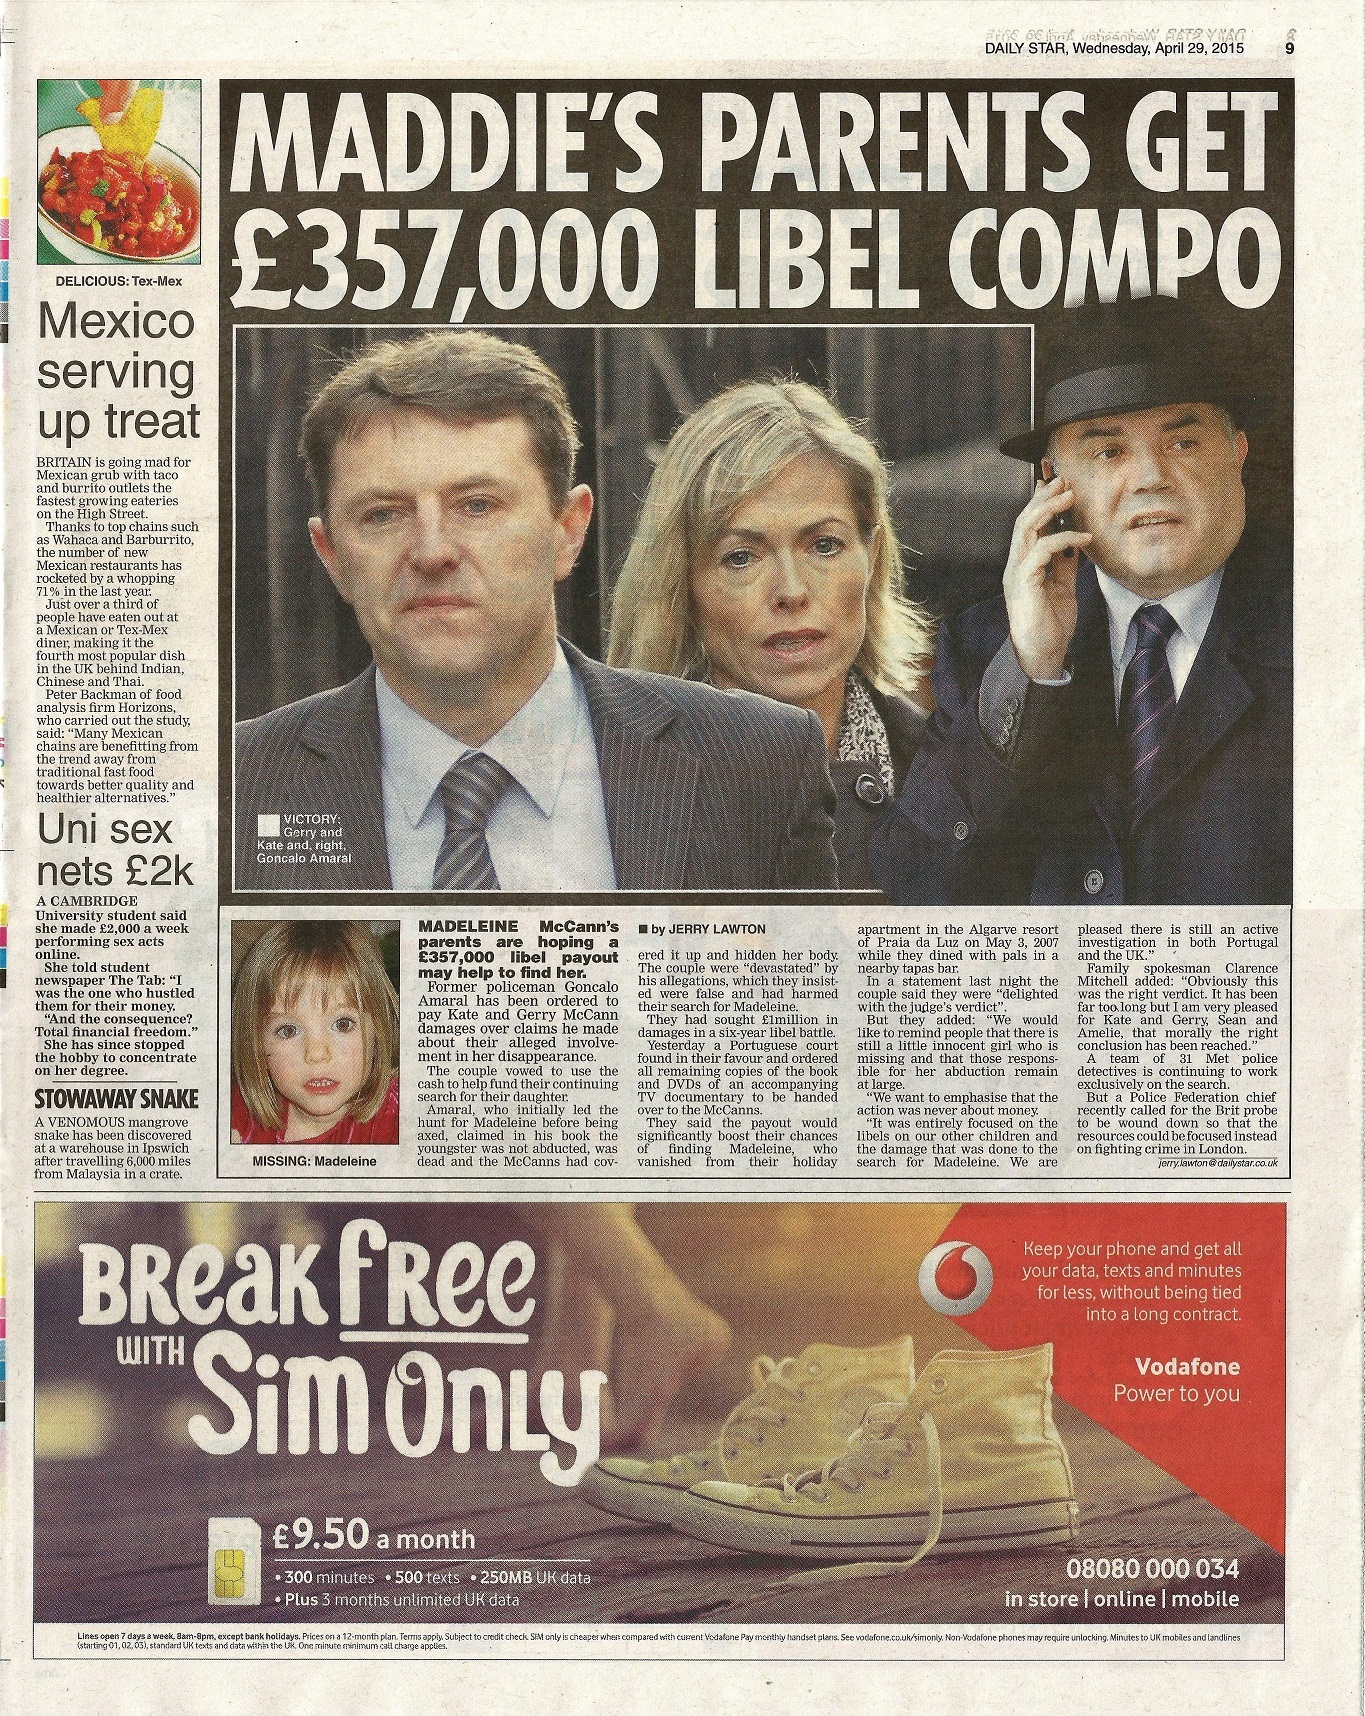 Maddie's parents get £357,000 libel compo Daily Star (paper edition, page 9)